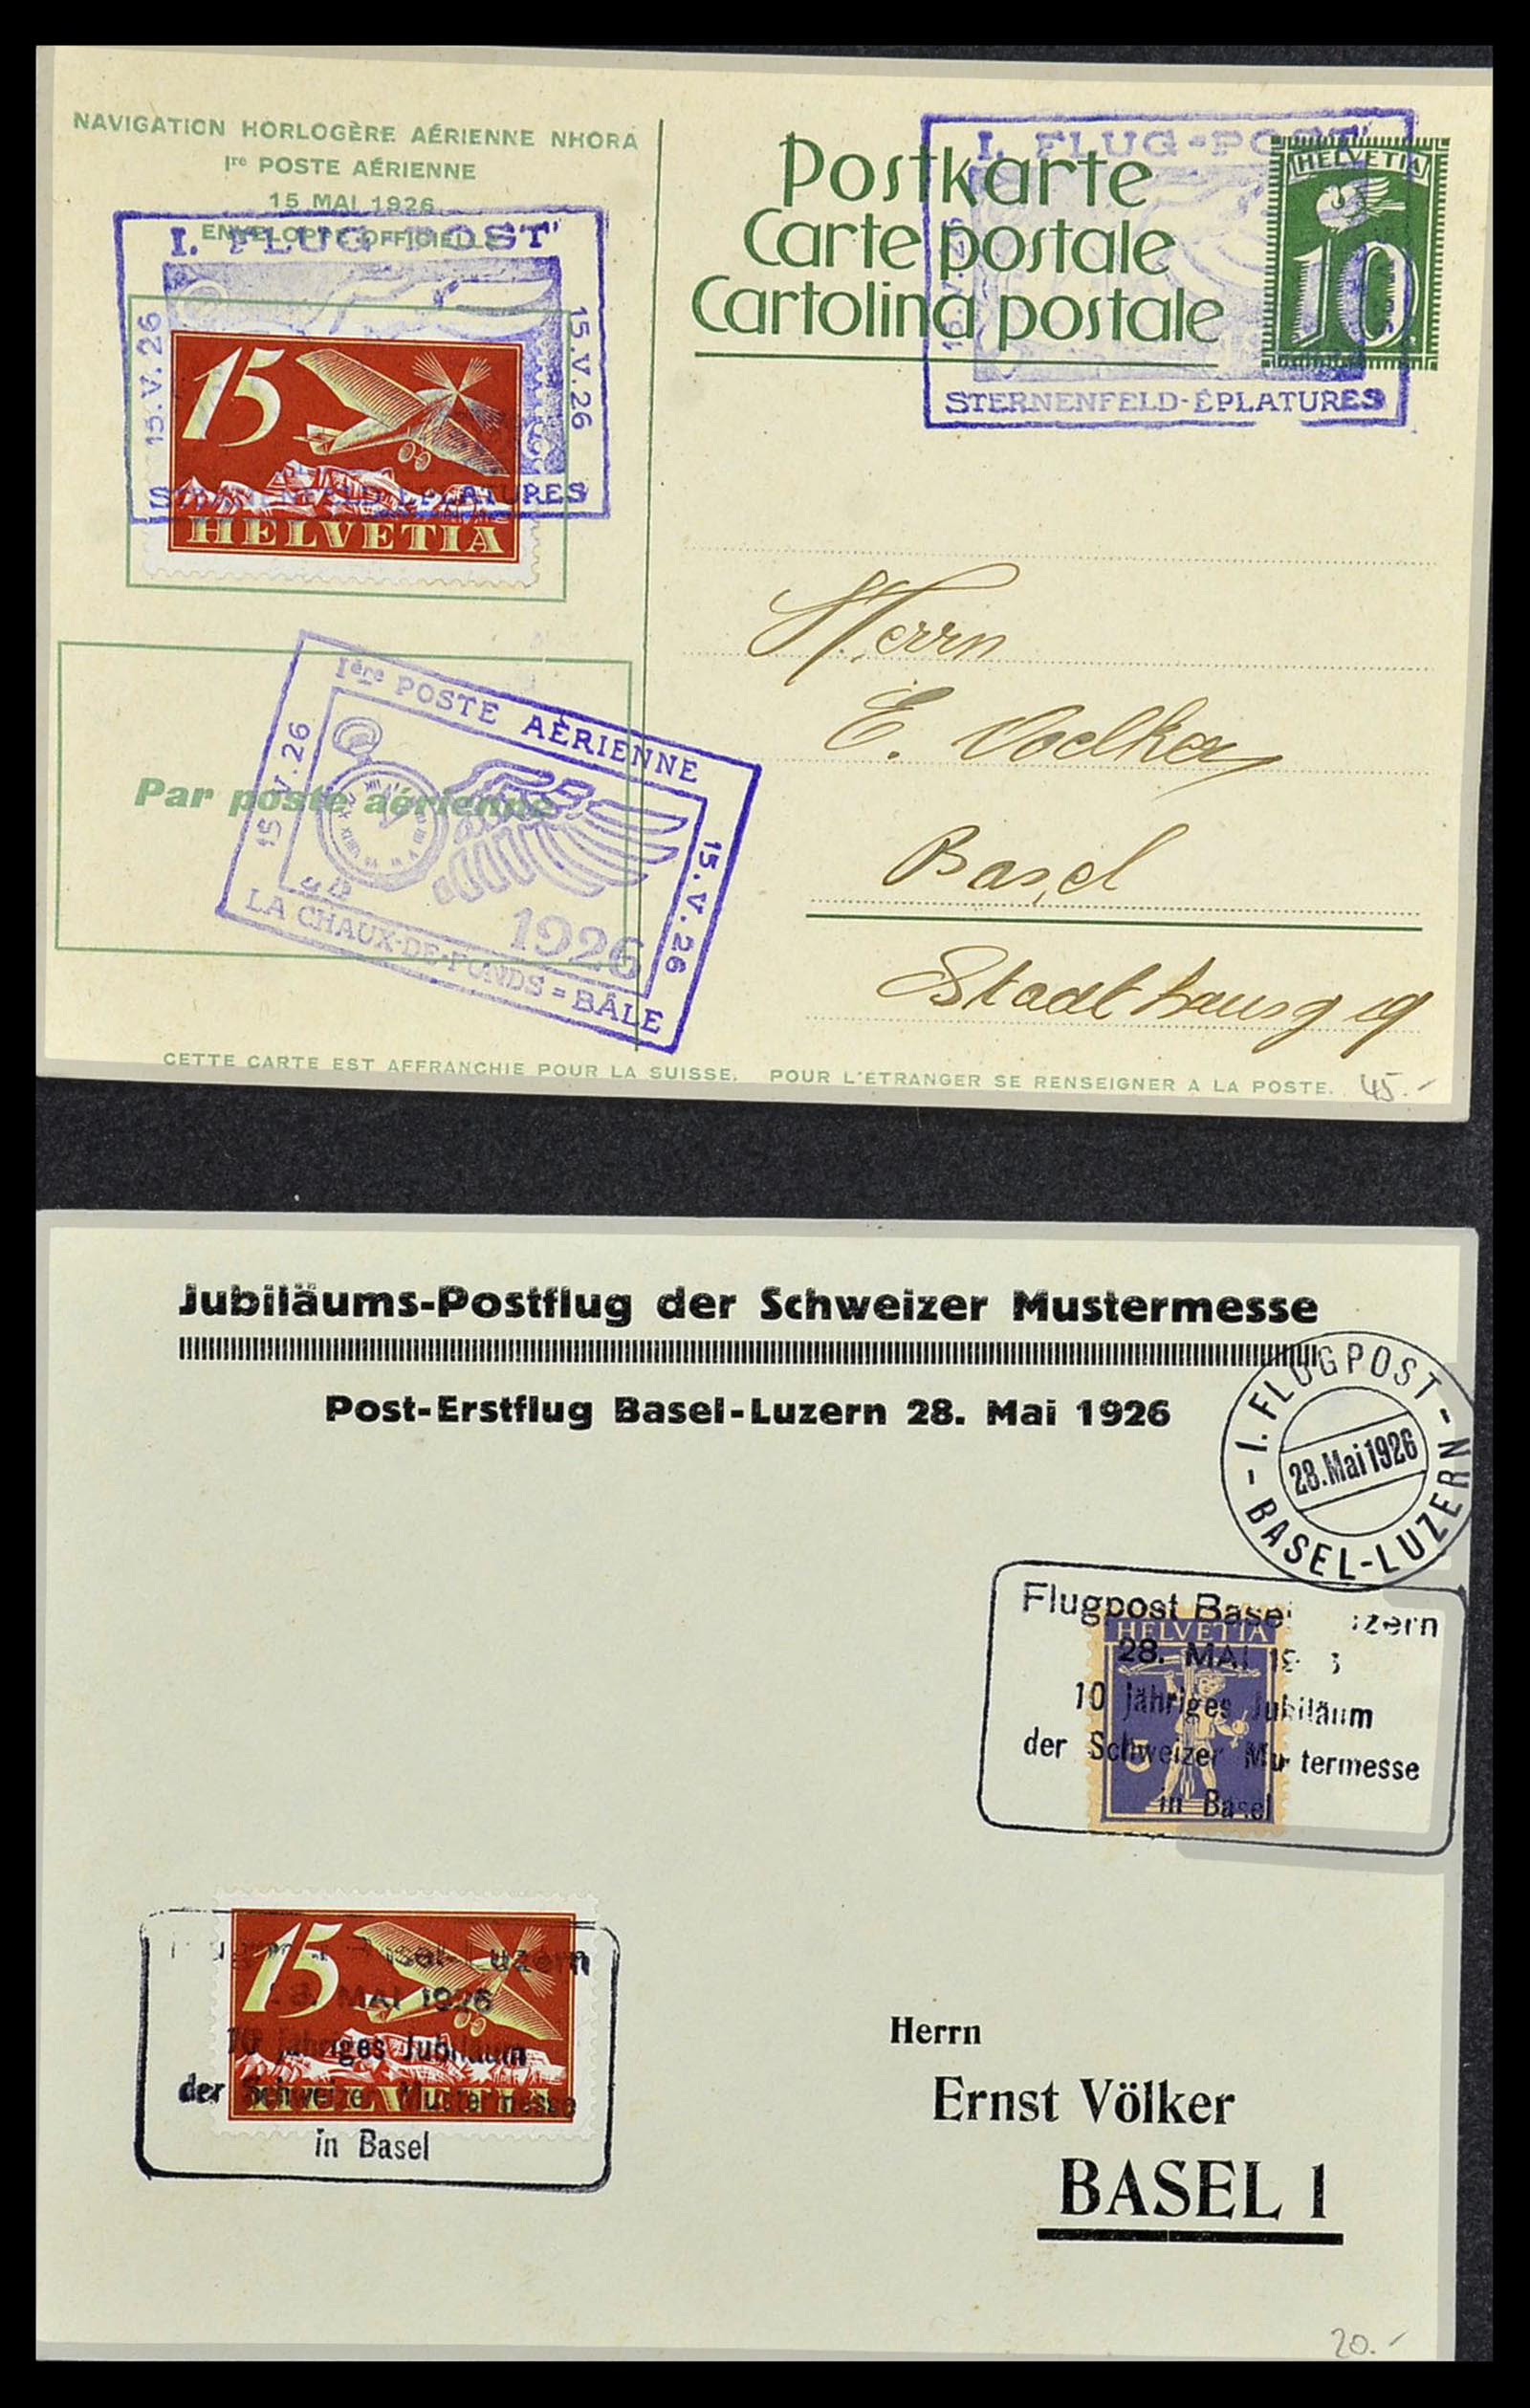 34141 048 - Stamp collection 34141 Switzerland airmail covers 1920-1960.